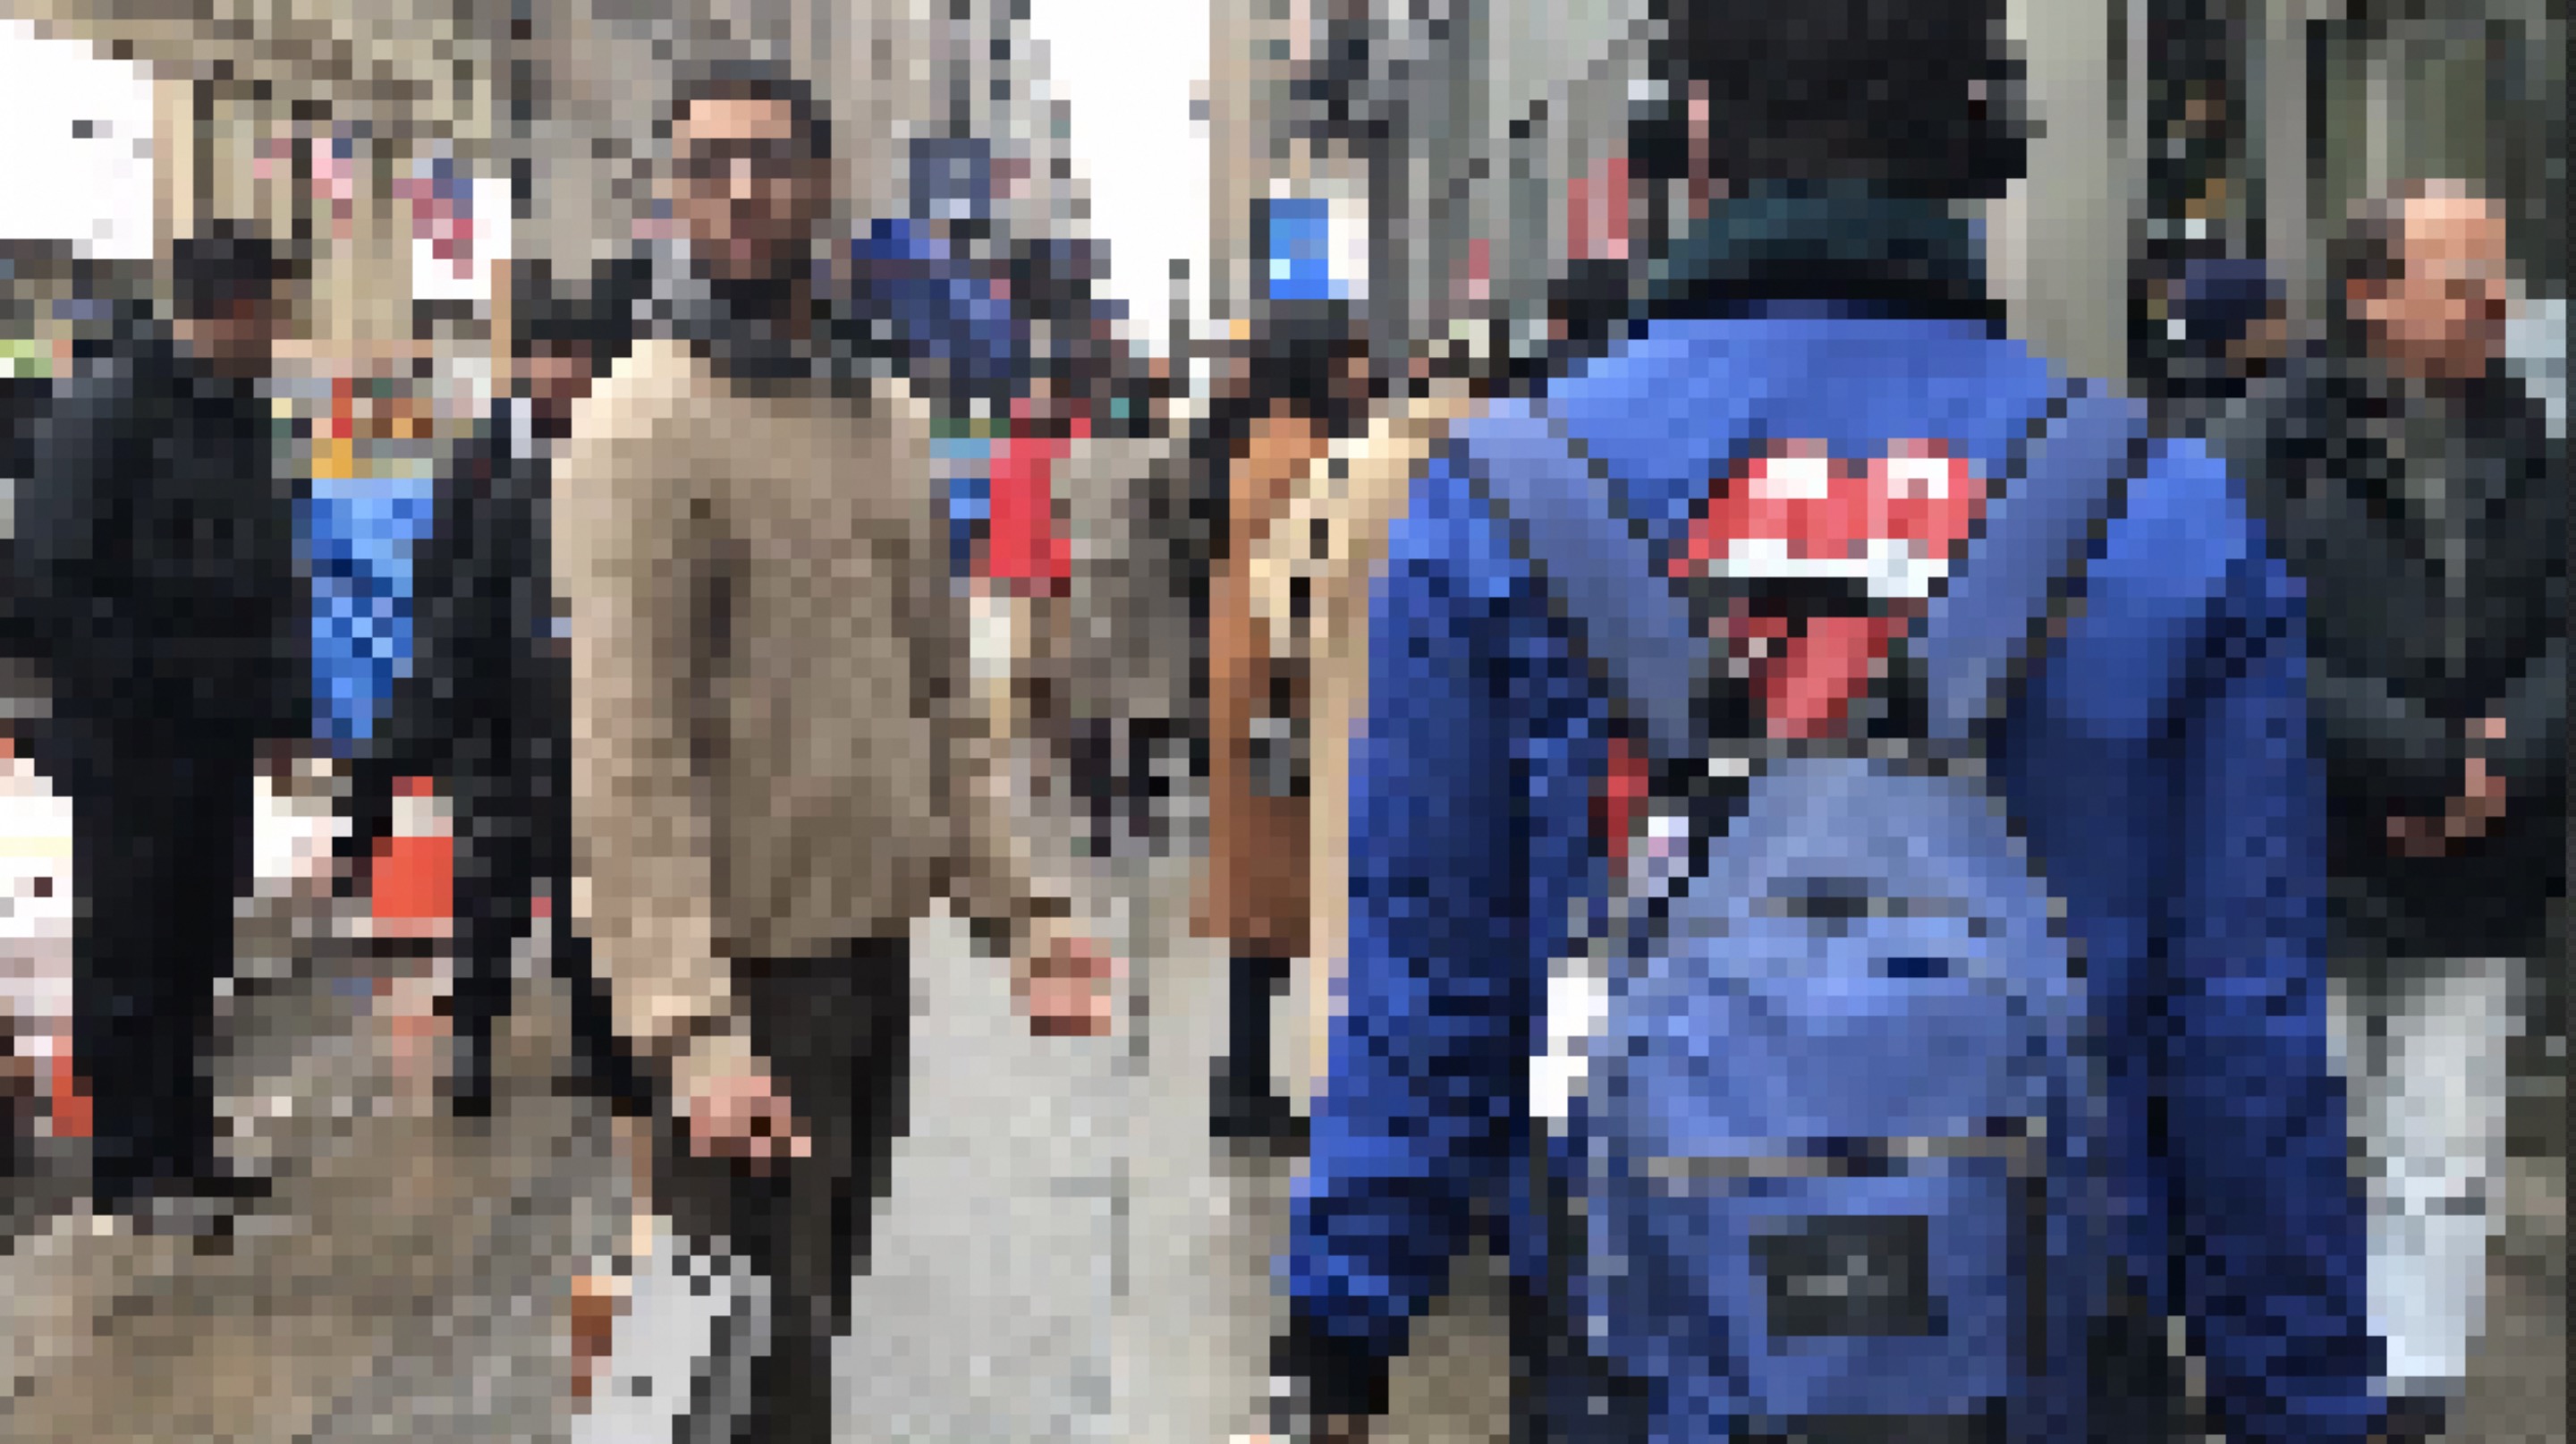 A pixelated photo outside on the streets of Midtown Manhattan. A man in a beige sweater in the center frame looks toward the camera. Someone with a blue jacket with lips on it and a blue backpack walks away from the camera.